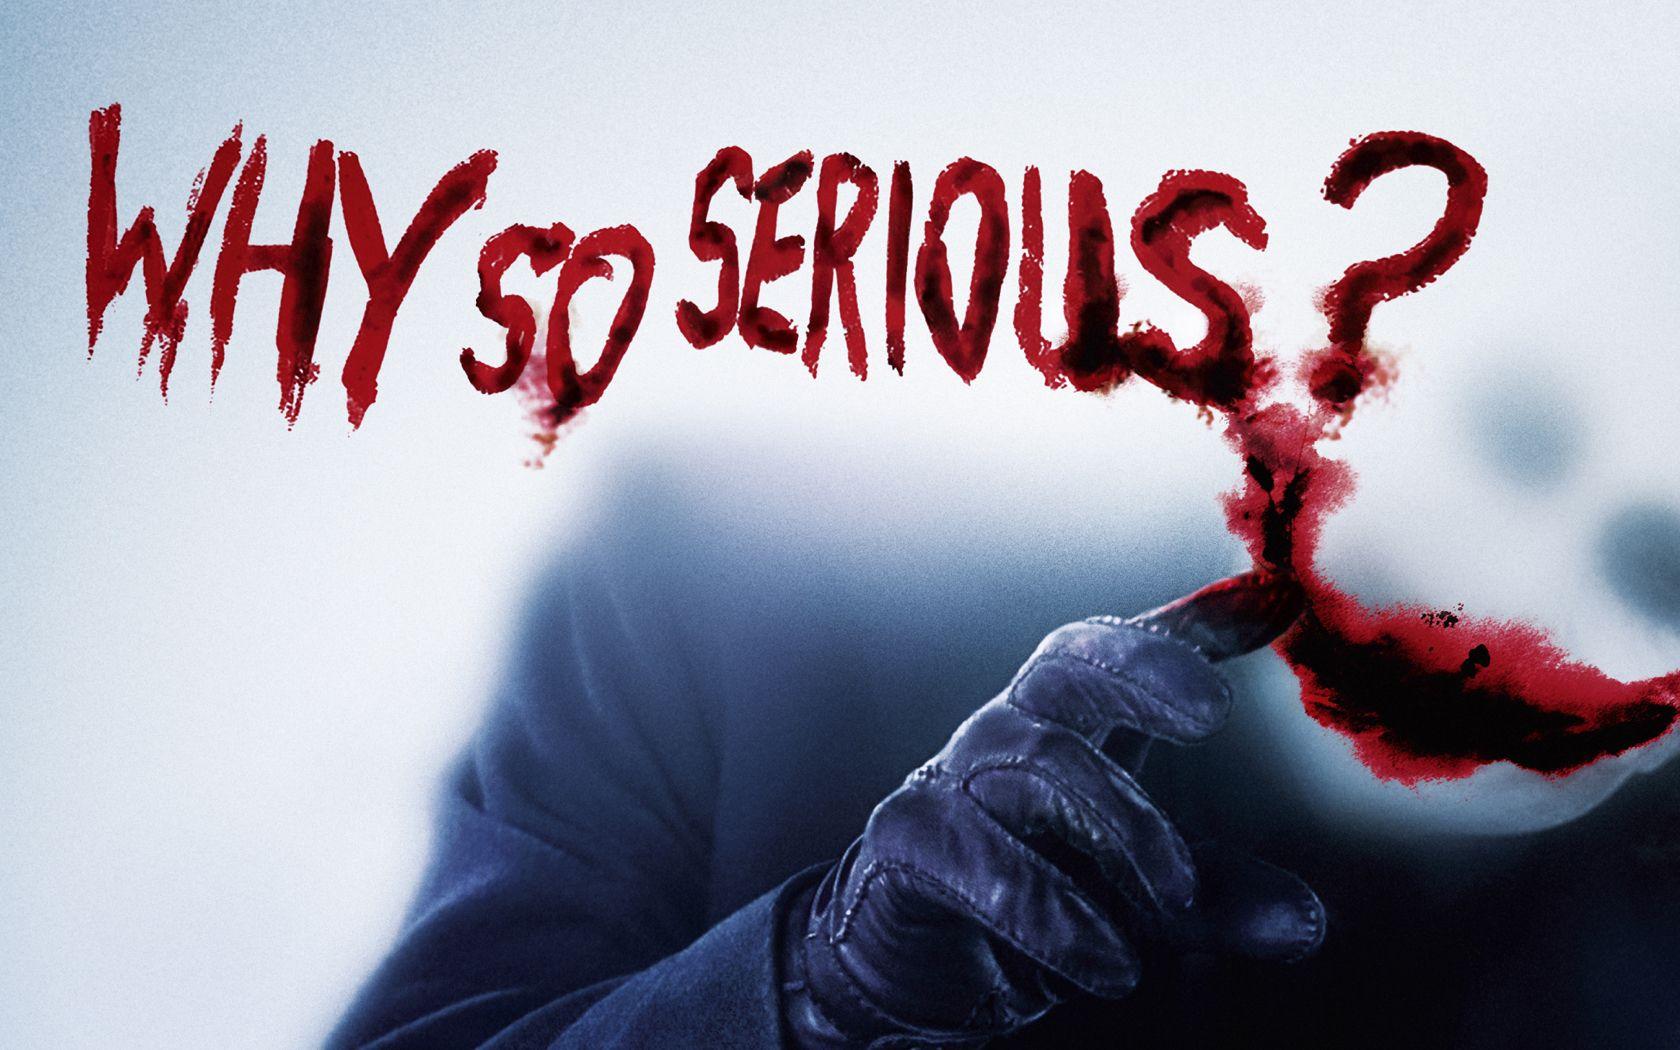 Why So Serious Wallpaper Image Photo Picture Background